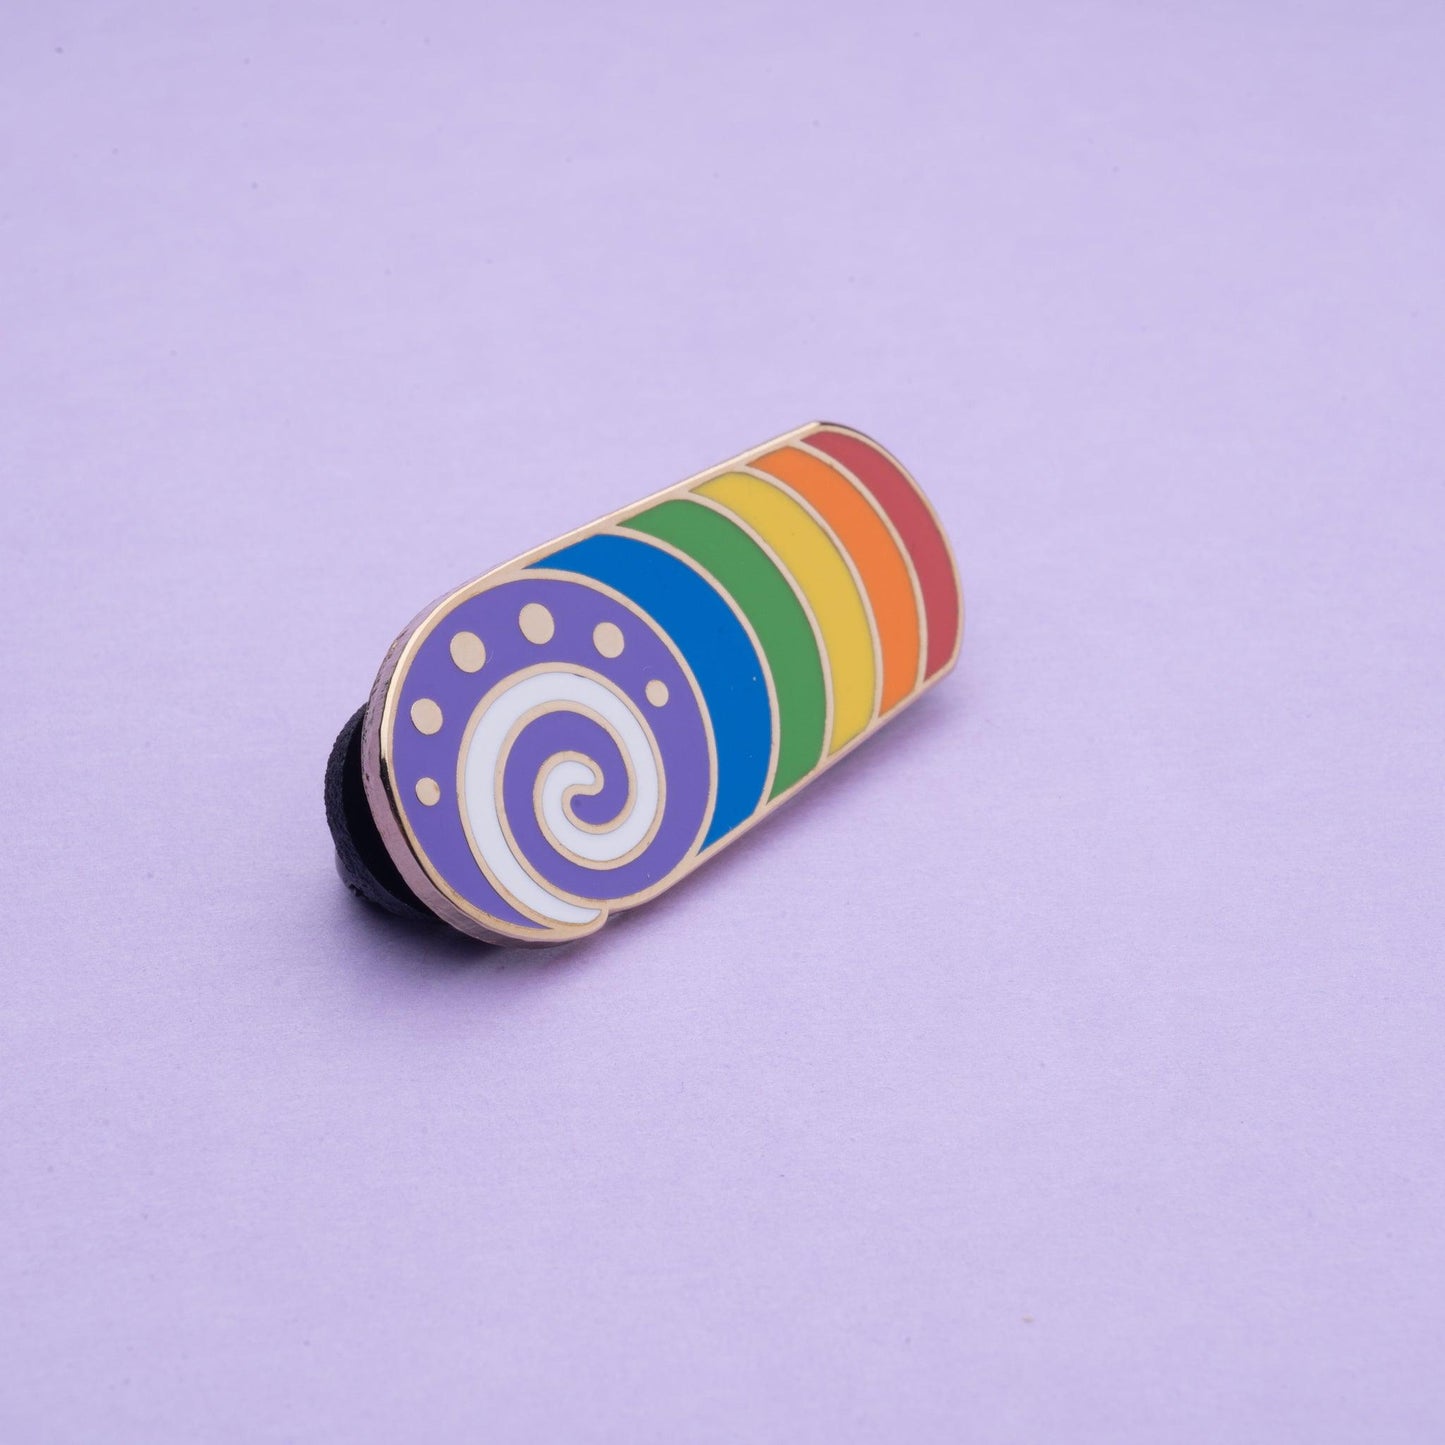 rainbow cake swirl enamel pin where each section is a different colour of the rainbow with purple at the front and a white cream swirl